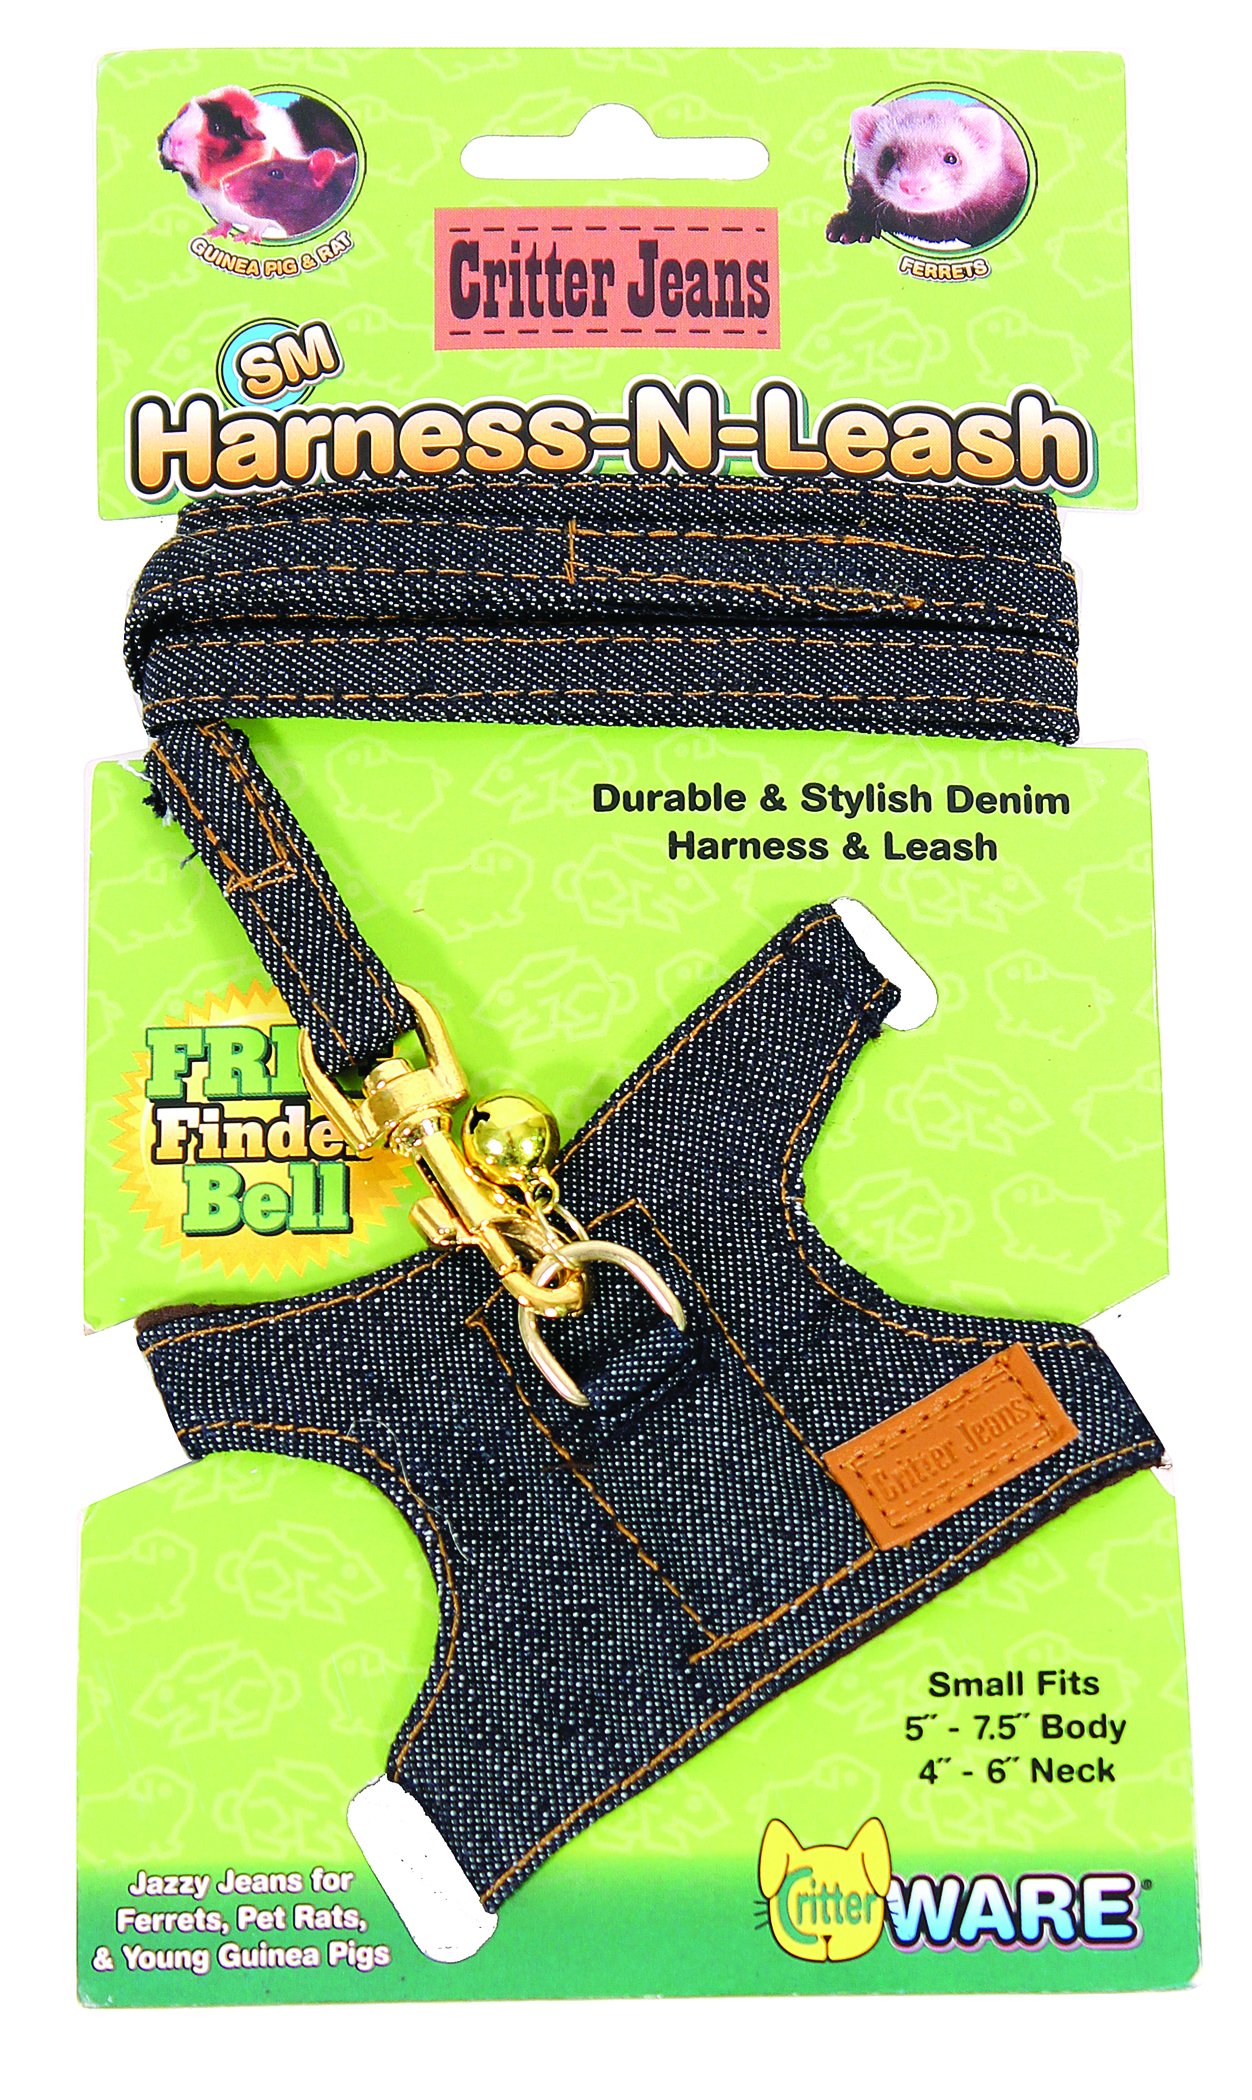 CRITTER JEANS SMALL ANIAML HARNESS-N-LEASH